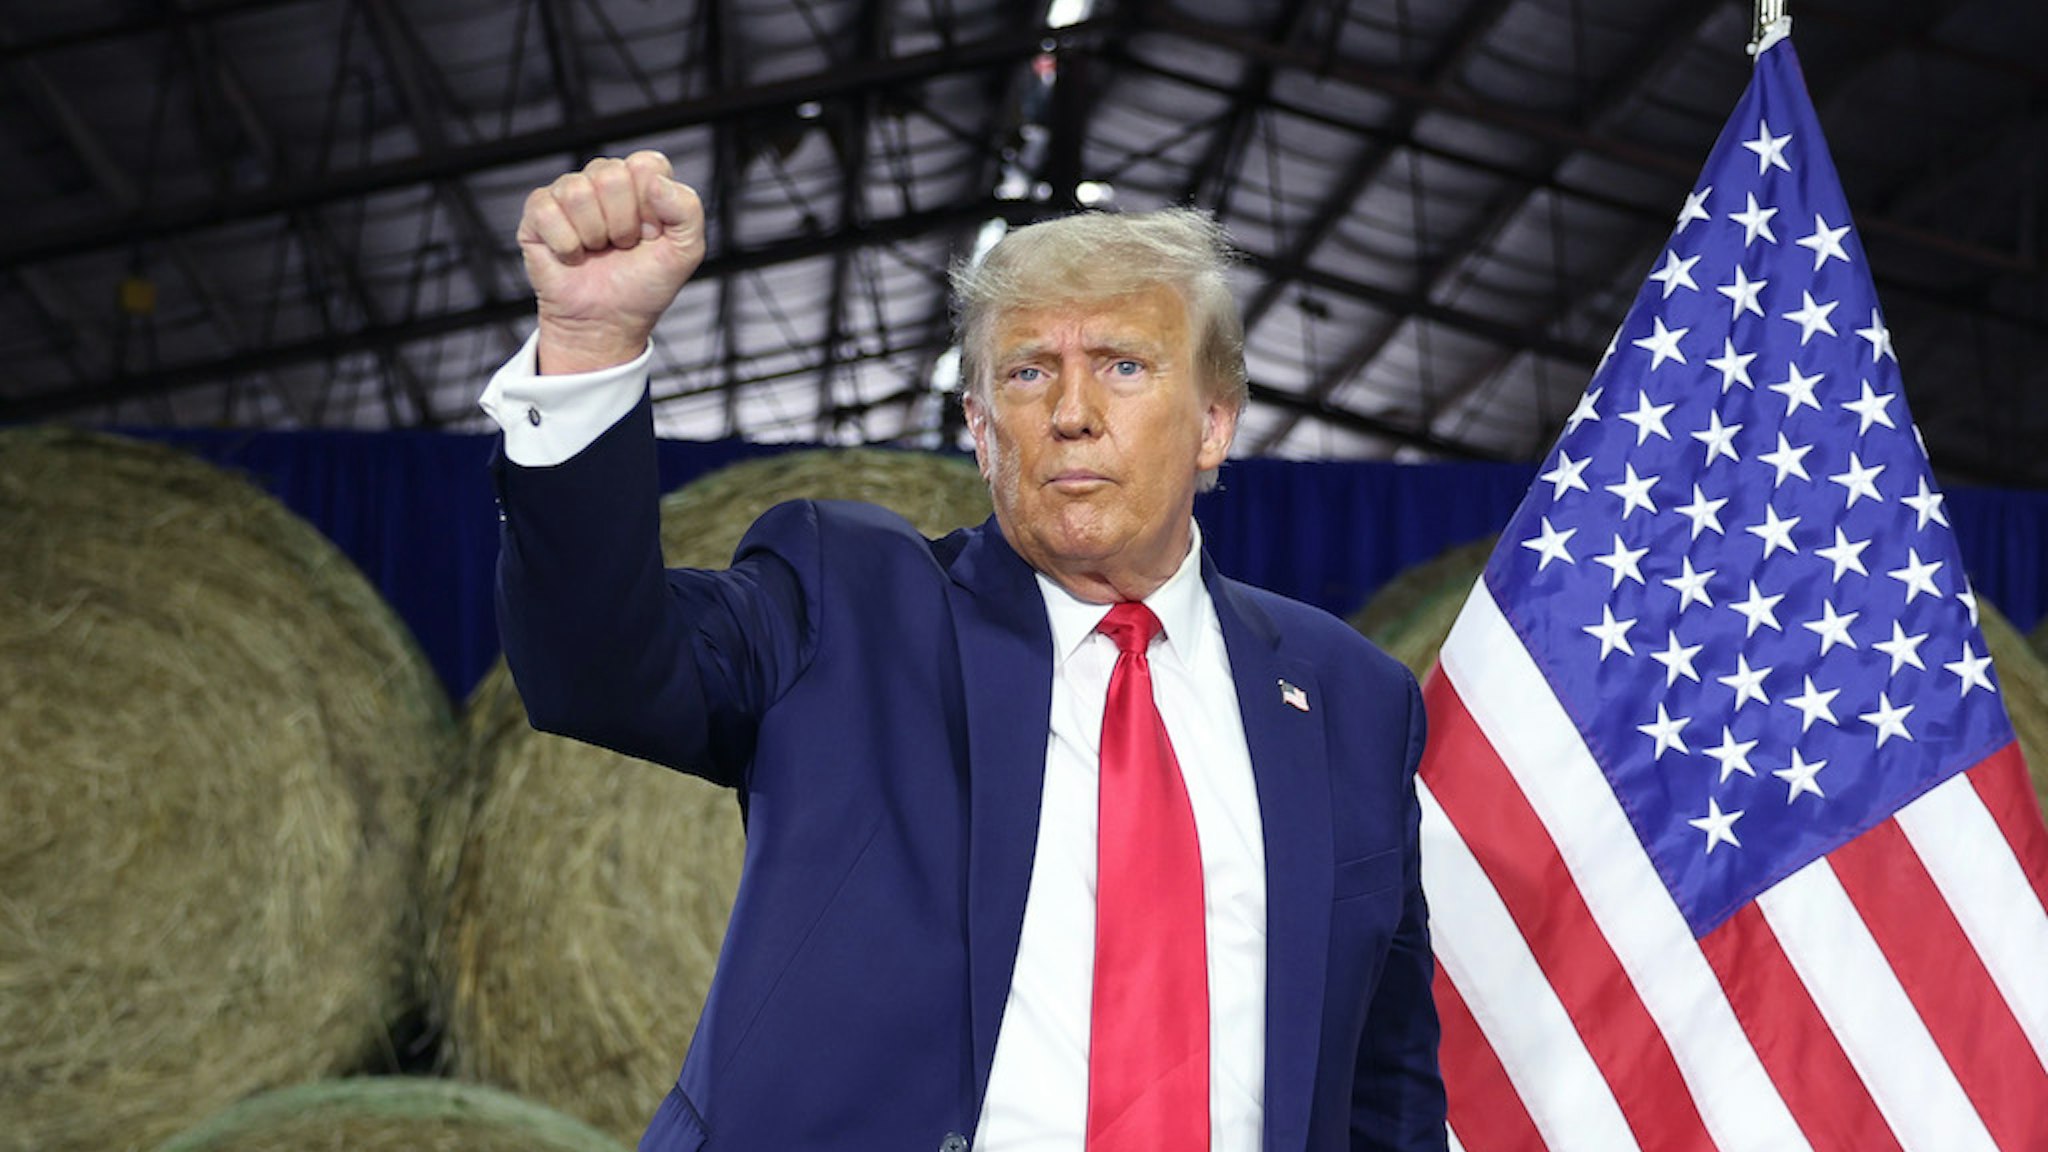 ADEL, IOWA - OCTOBER 16: Republican presidential candidate former President Donald Trump finishes a campaign event at the Dallas County Fairgrounds on October 16, 2023 in Adel, Iowa. Trump is also scheduled to speak at a rally in nearby Clive later in the afternoon. (Photo by Scott Olson/Getty Images)